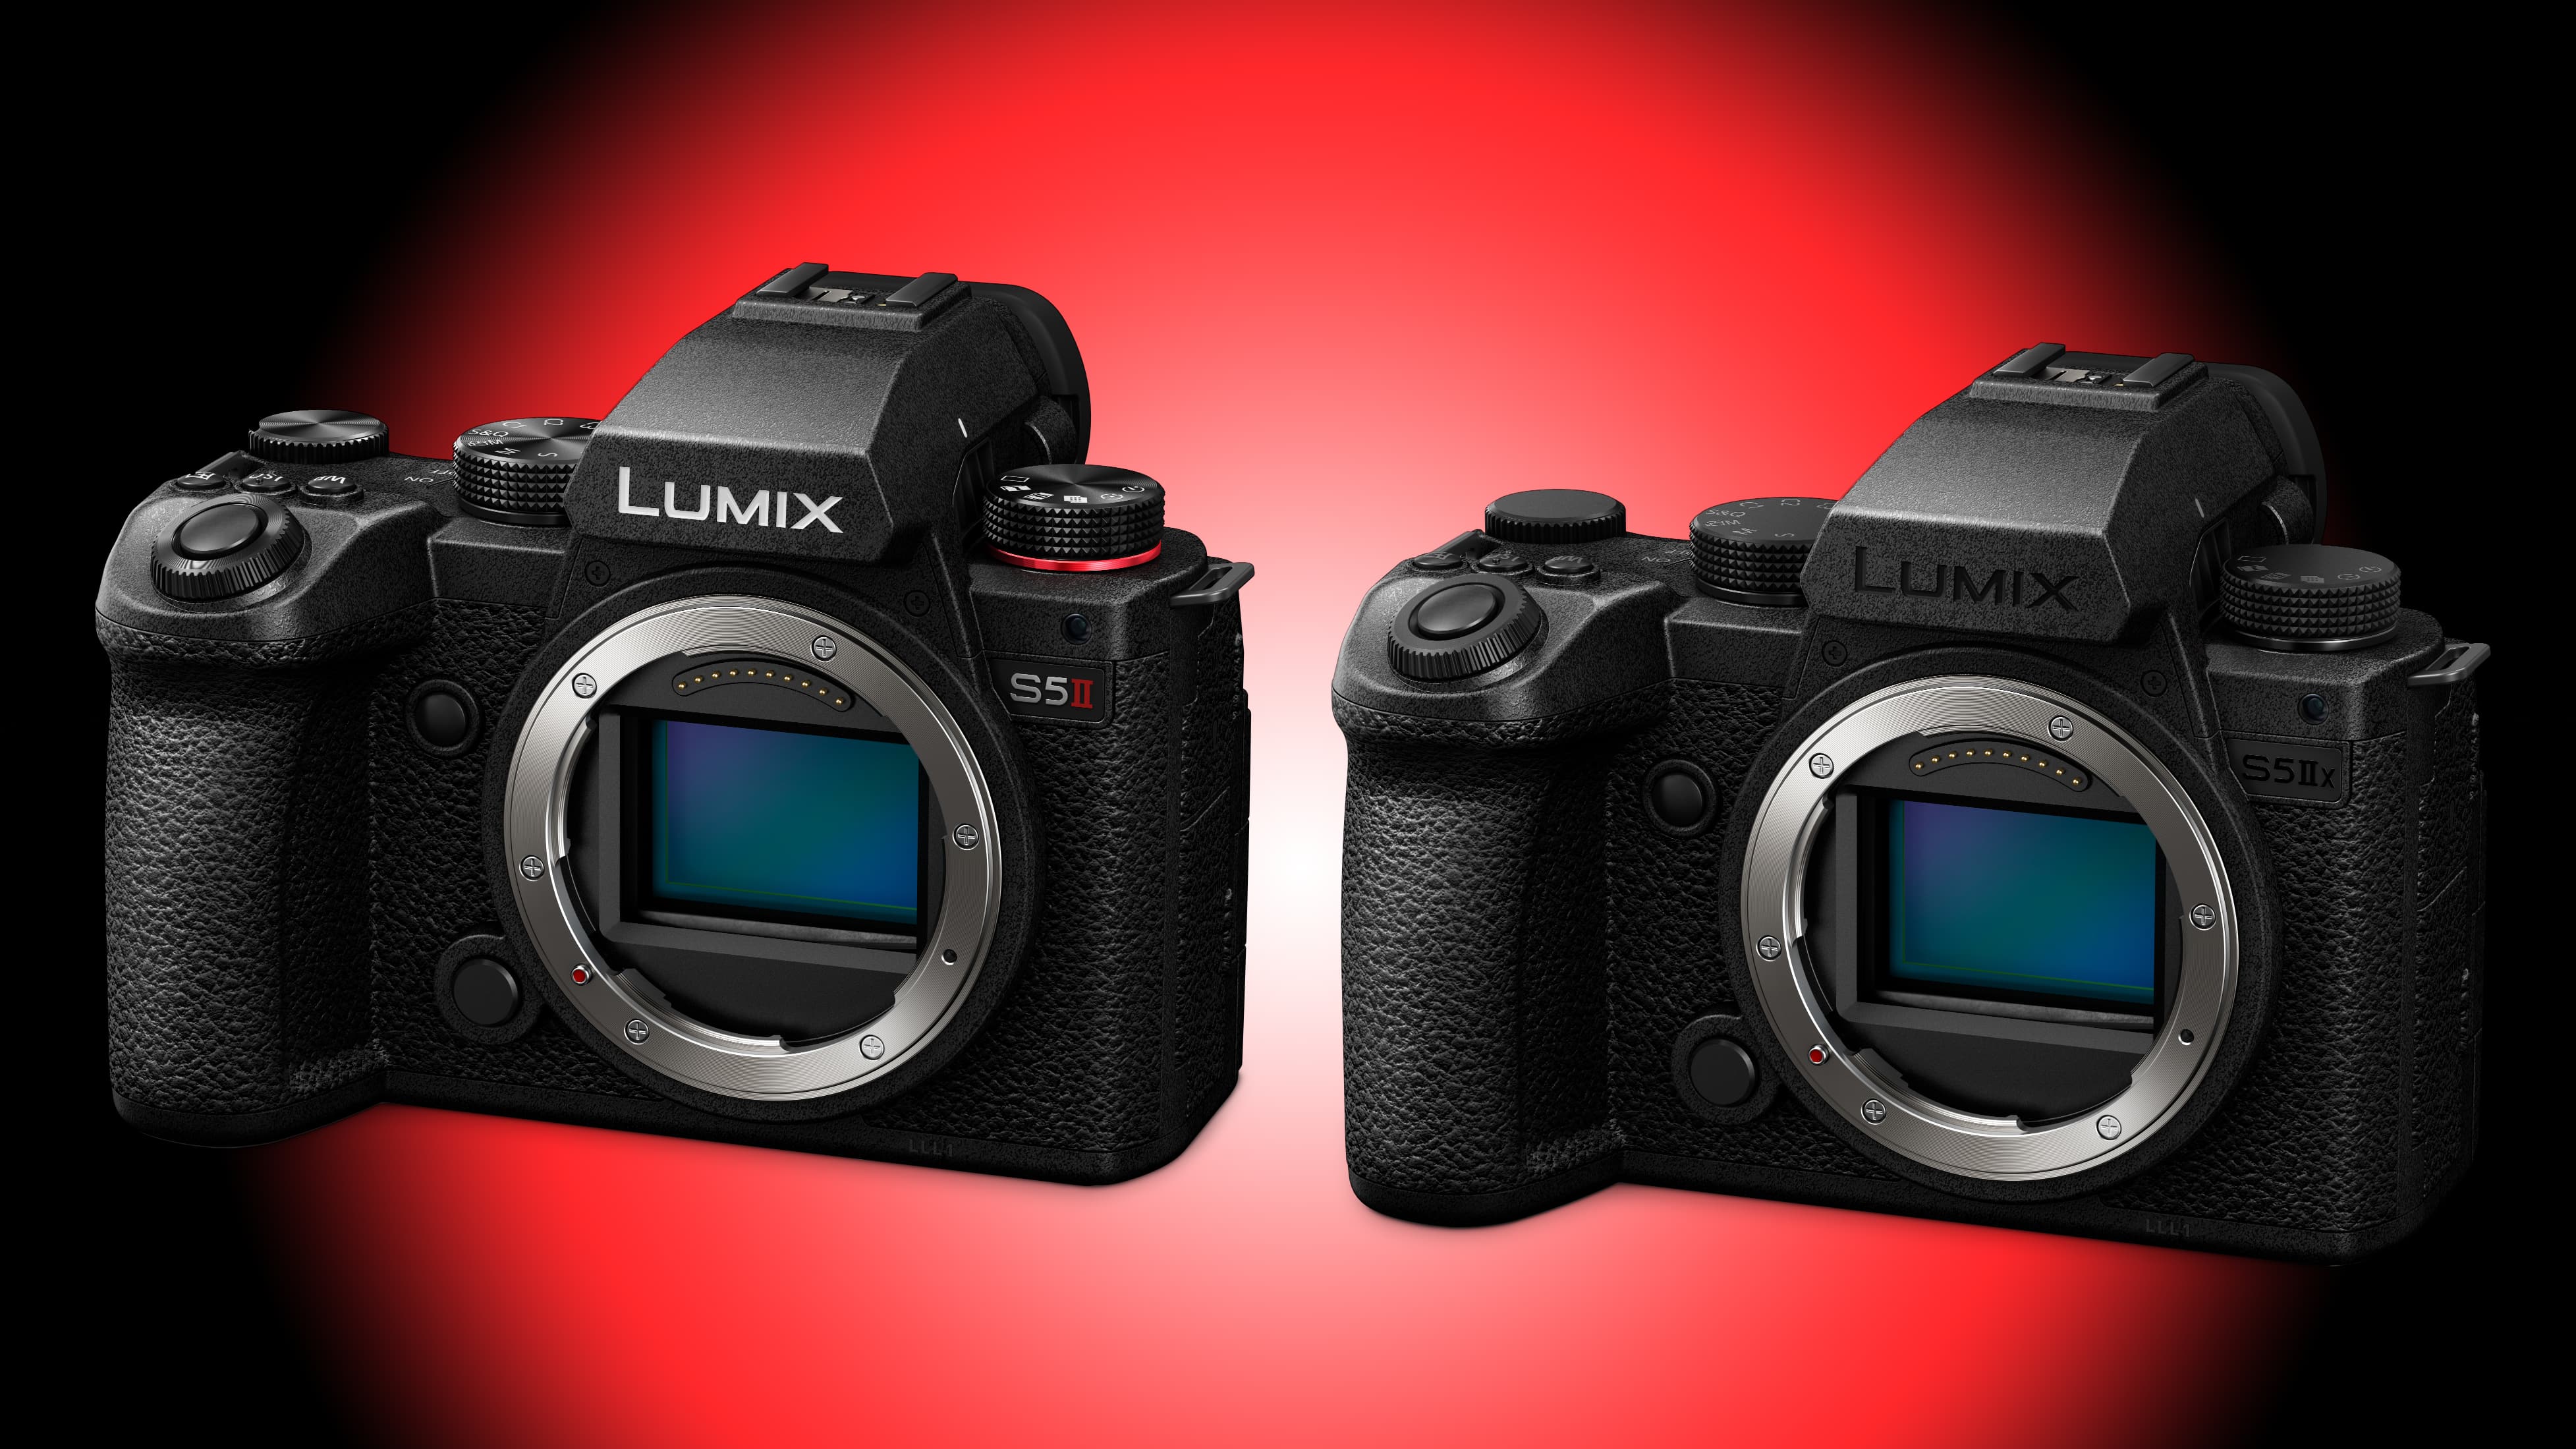 How is the LUMIX S5 IIX Different from the S5 II? 